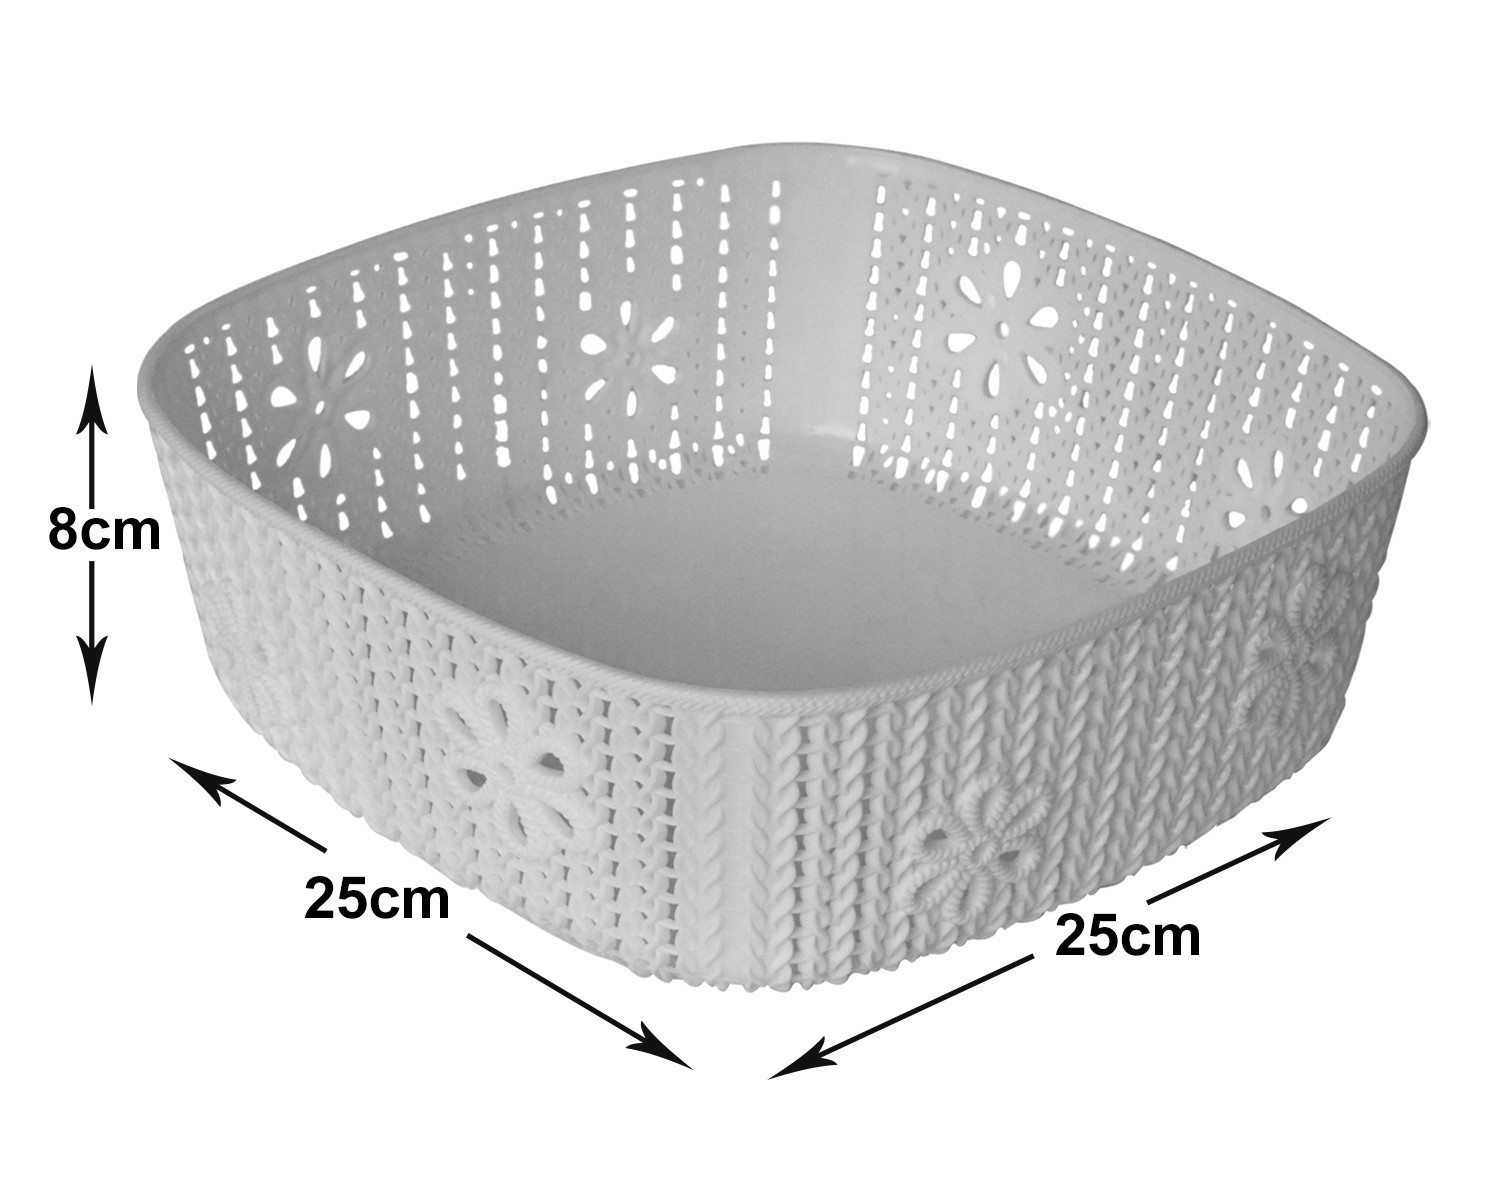 Kuber Industries Woven Design Multipurpose Square Shape Basket Ideal for Friuts, Vegetable, Toys Small, Medium, Large Pack of 3 (Grey)